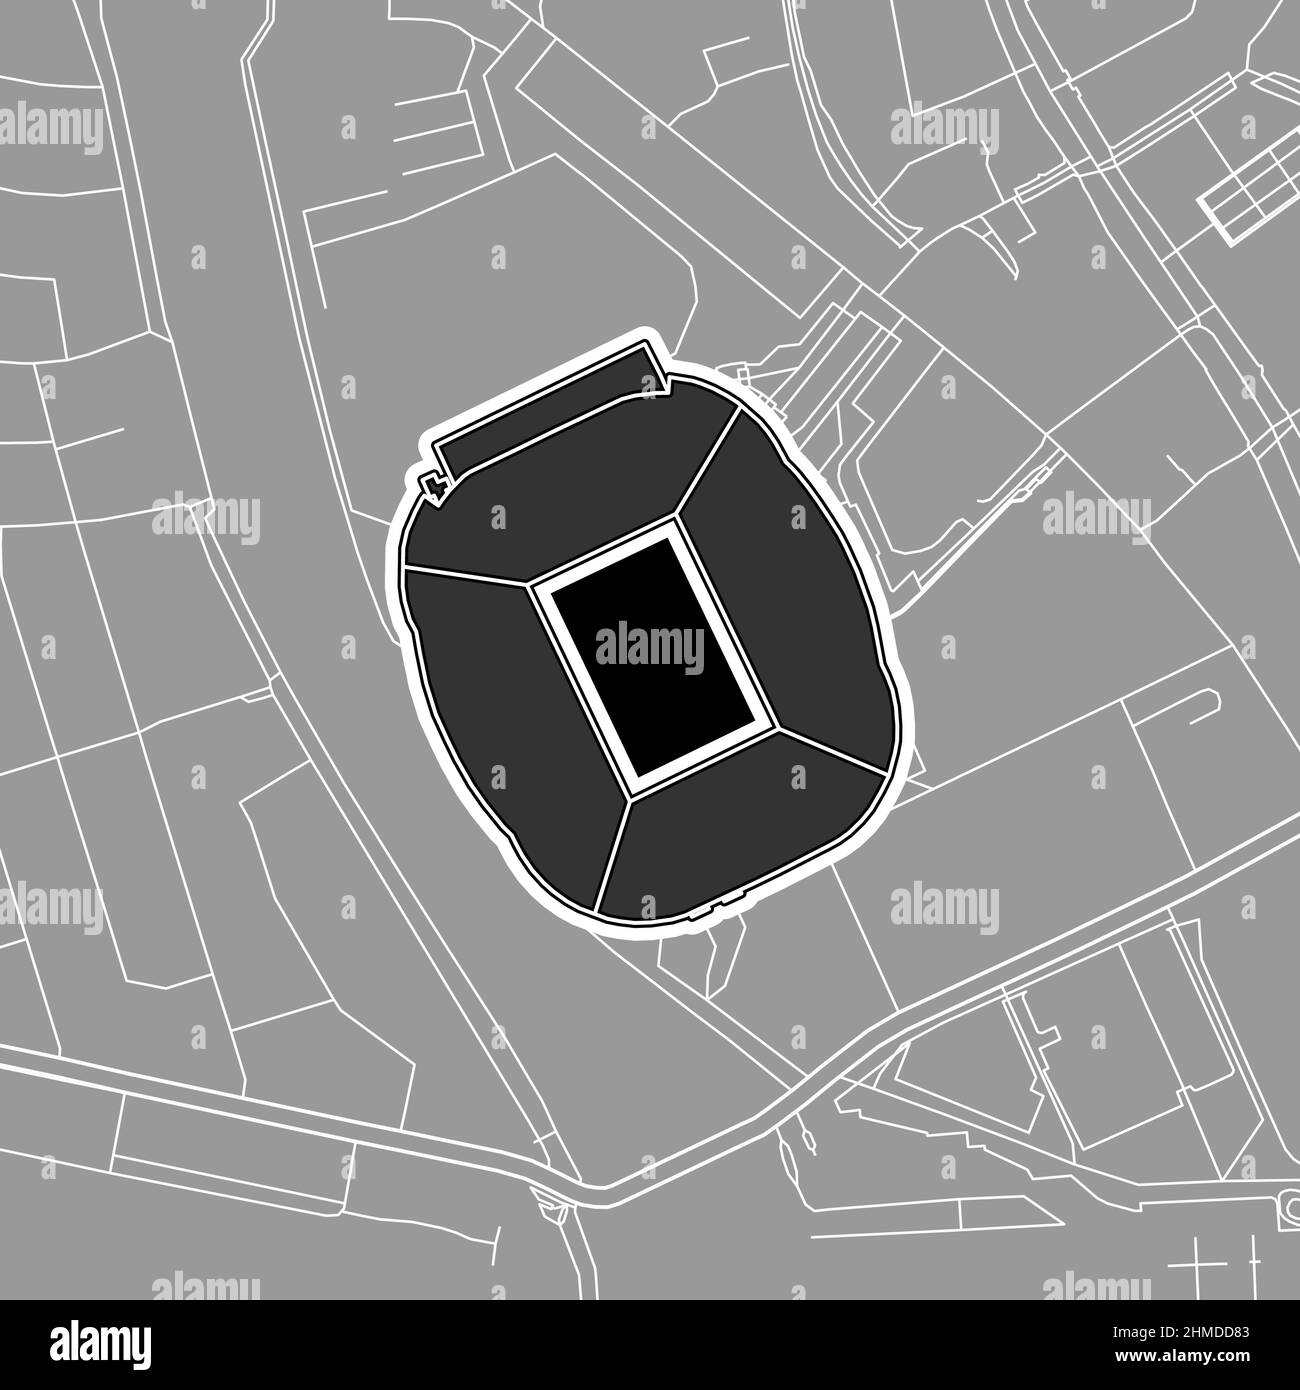 Cardiff, Baseball MLB Stadium, outline vector map. The baseball statium map was drawn with white areas and lines for main roads, side roads. Stock Vector